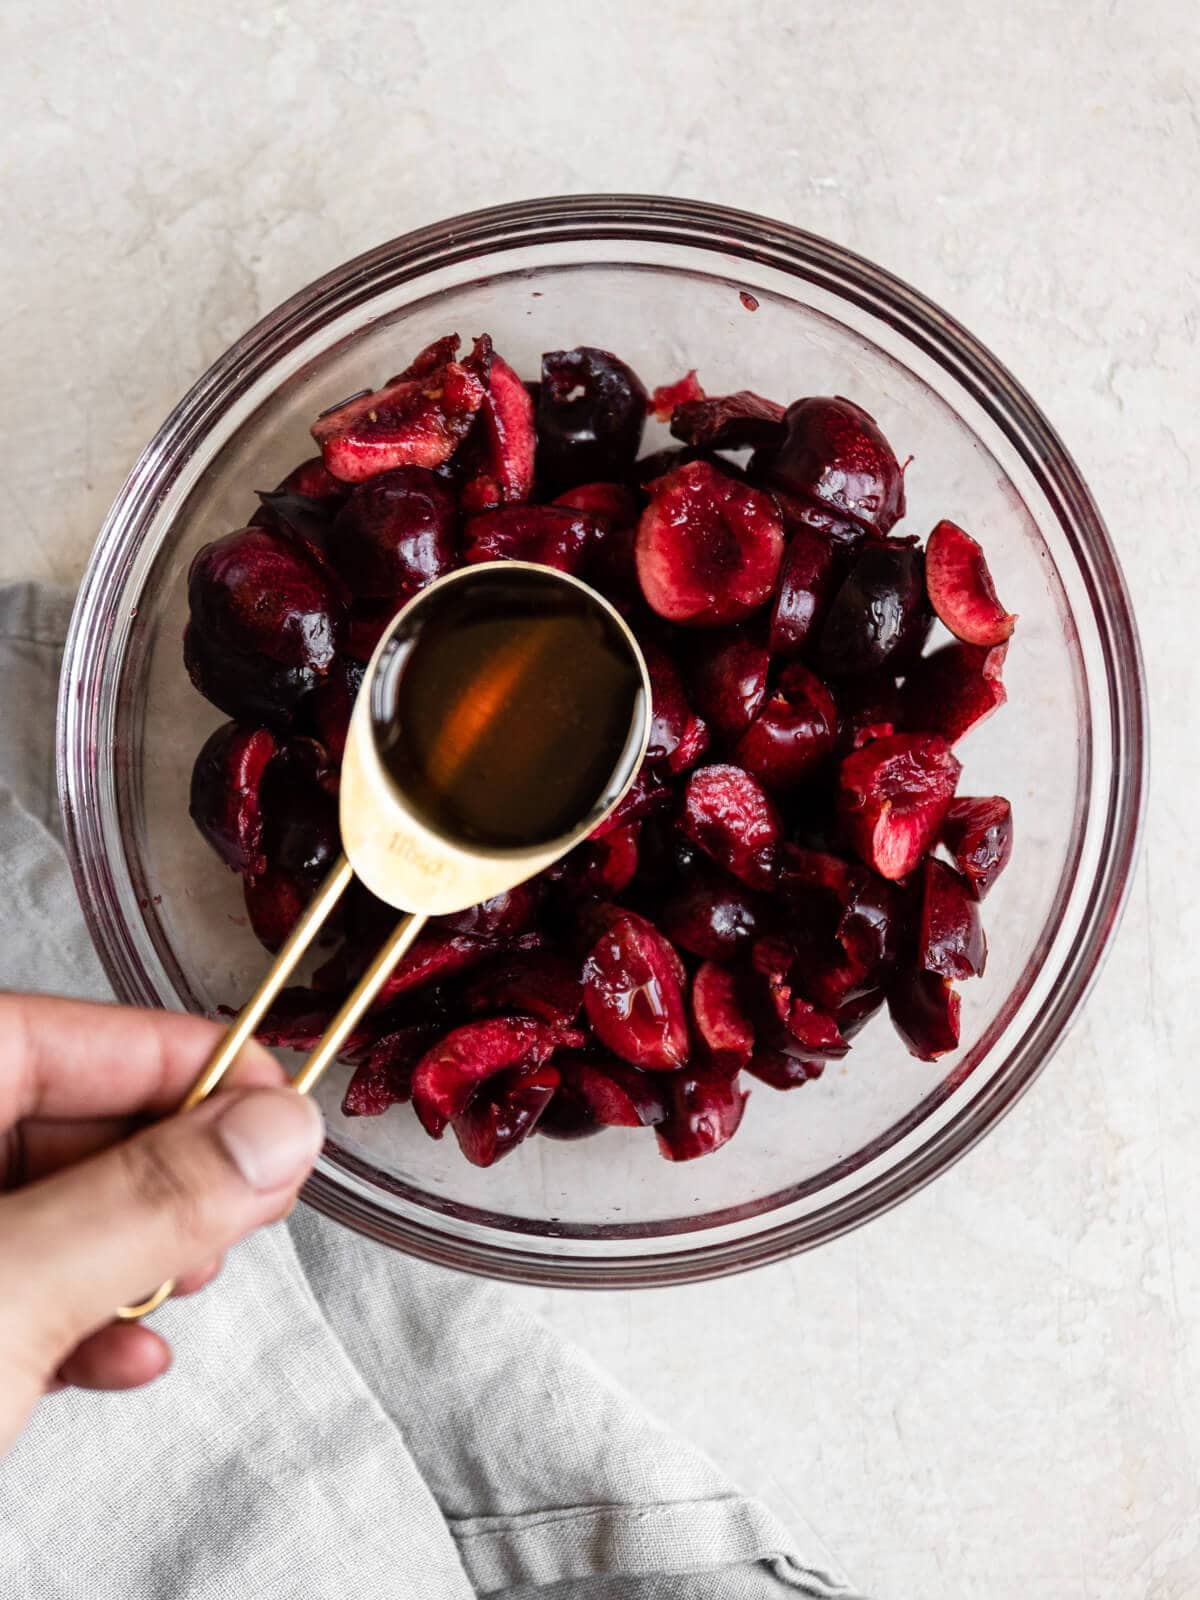 Hand pouring maple syrup into a bowl of cherries.